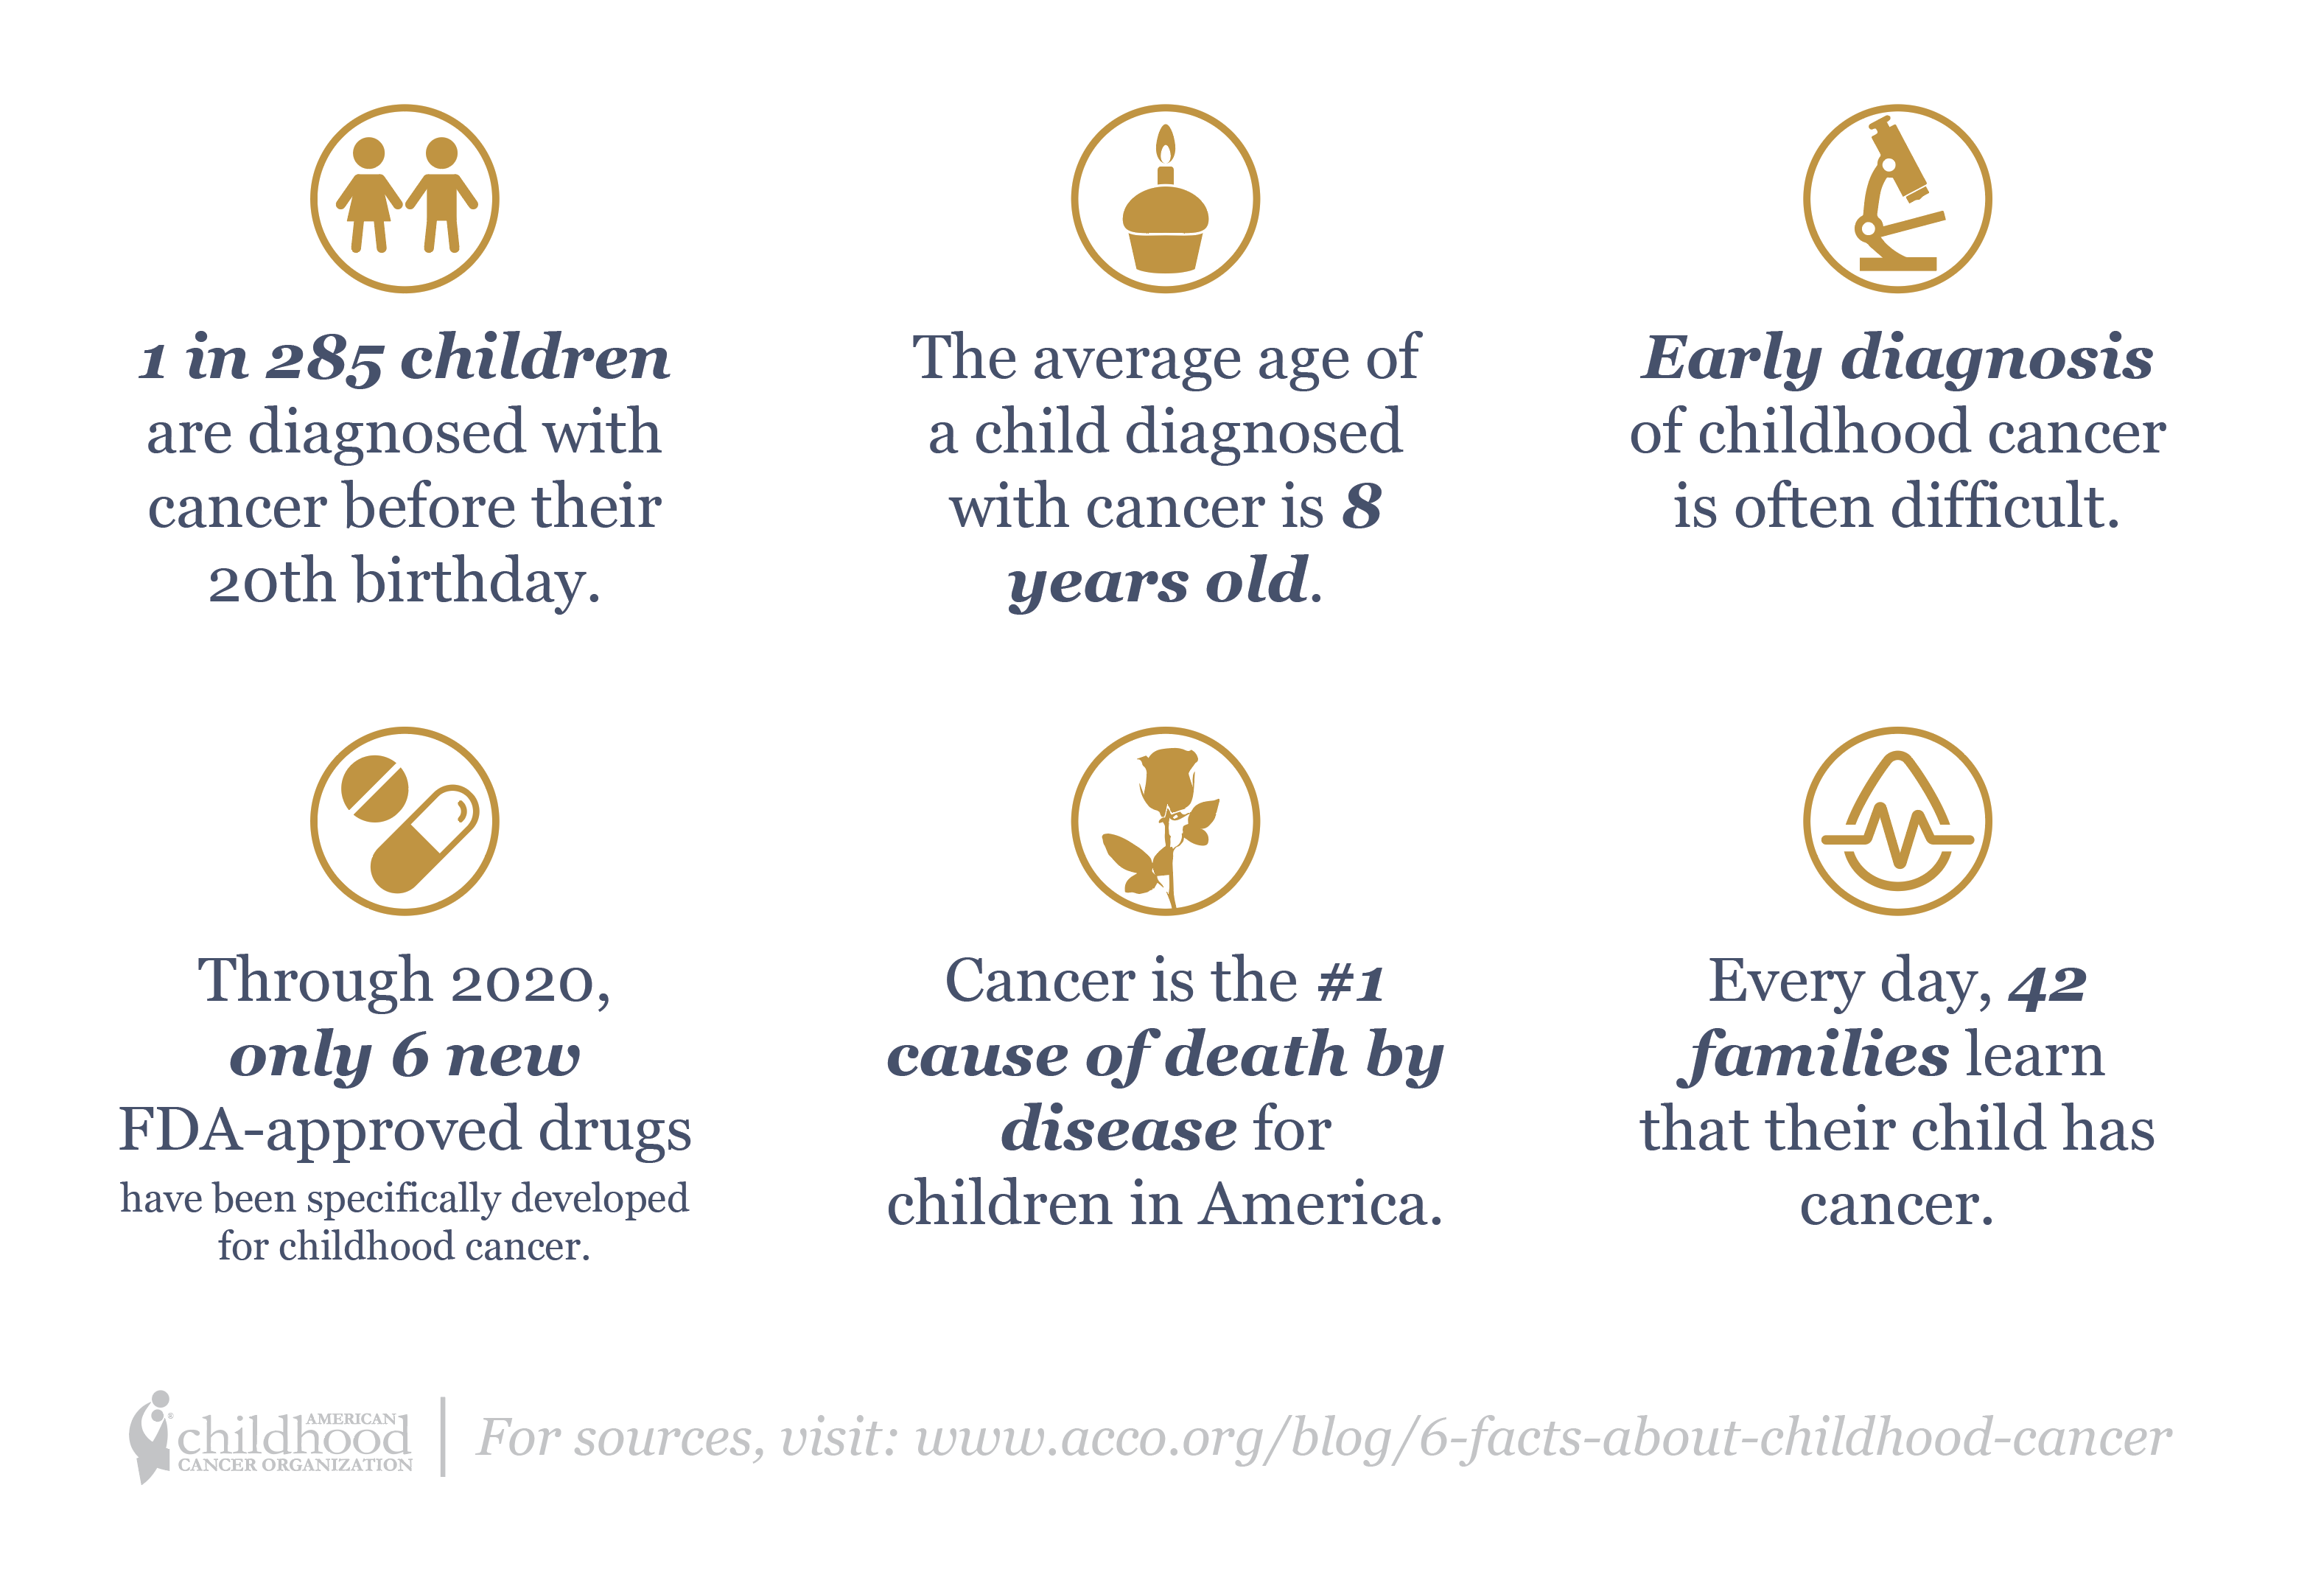 6 Facts About Childhood Cancer - ACCO